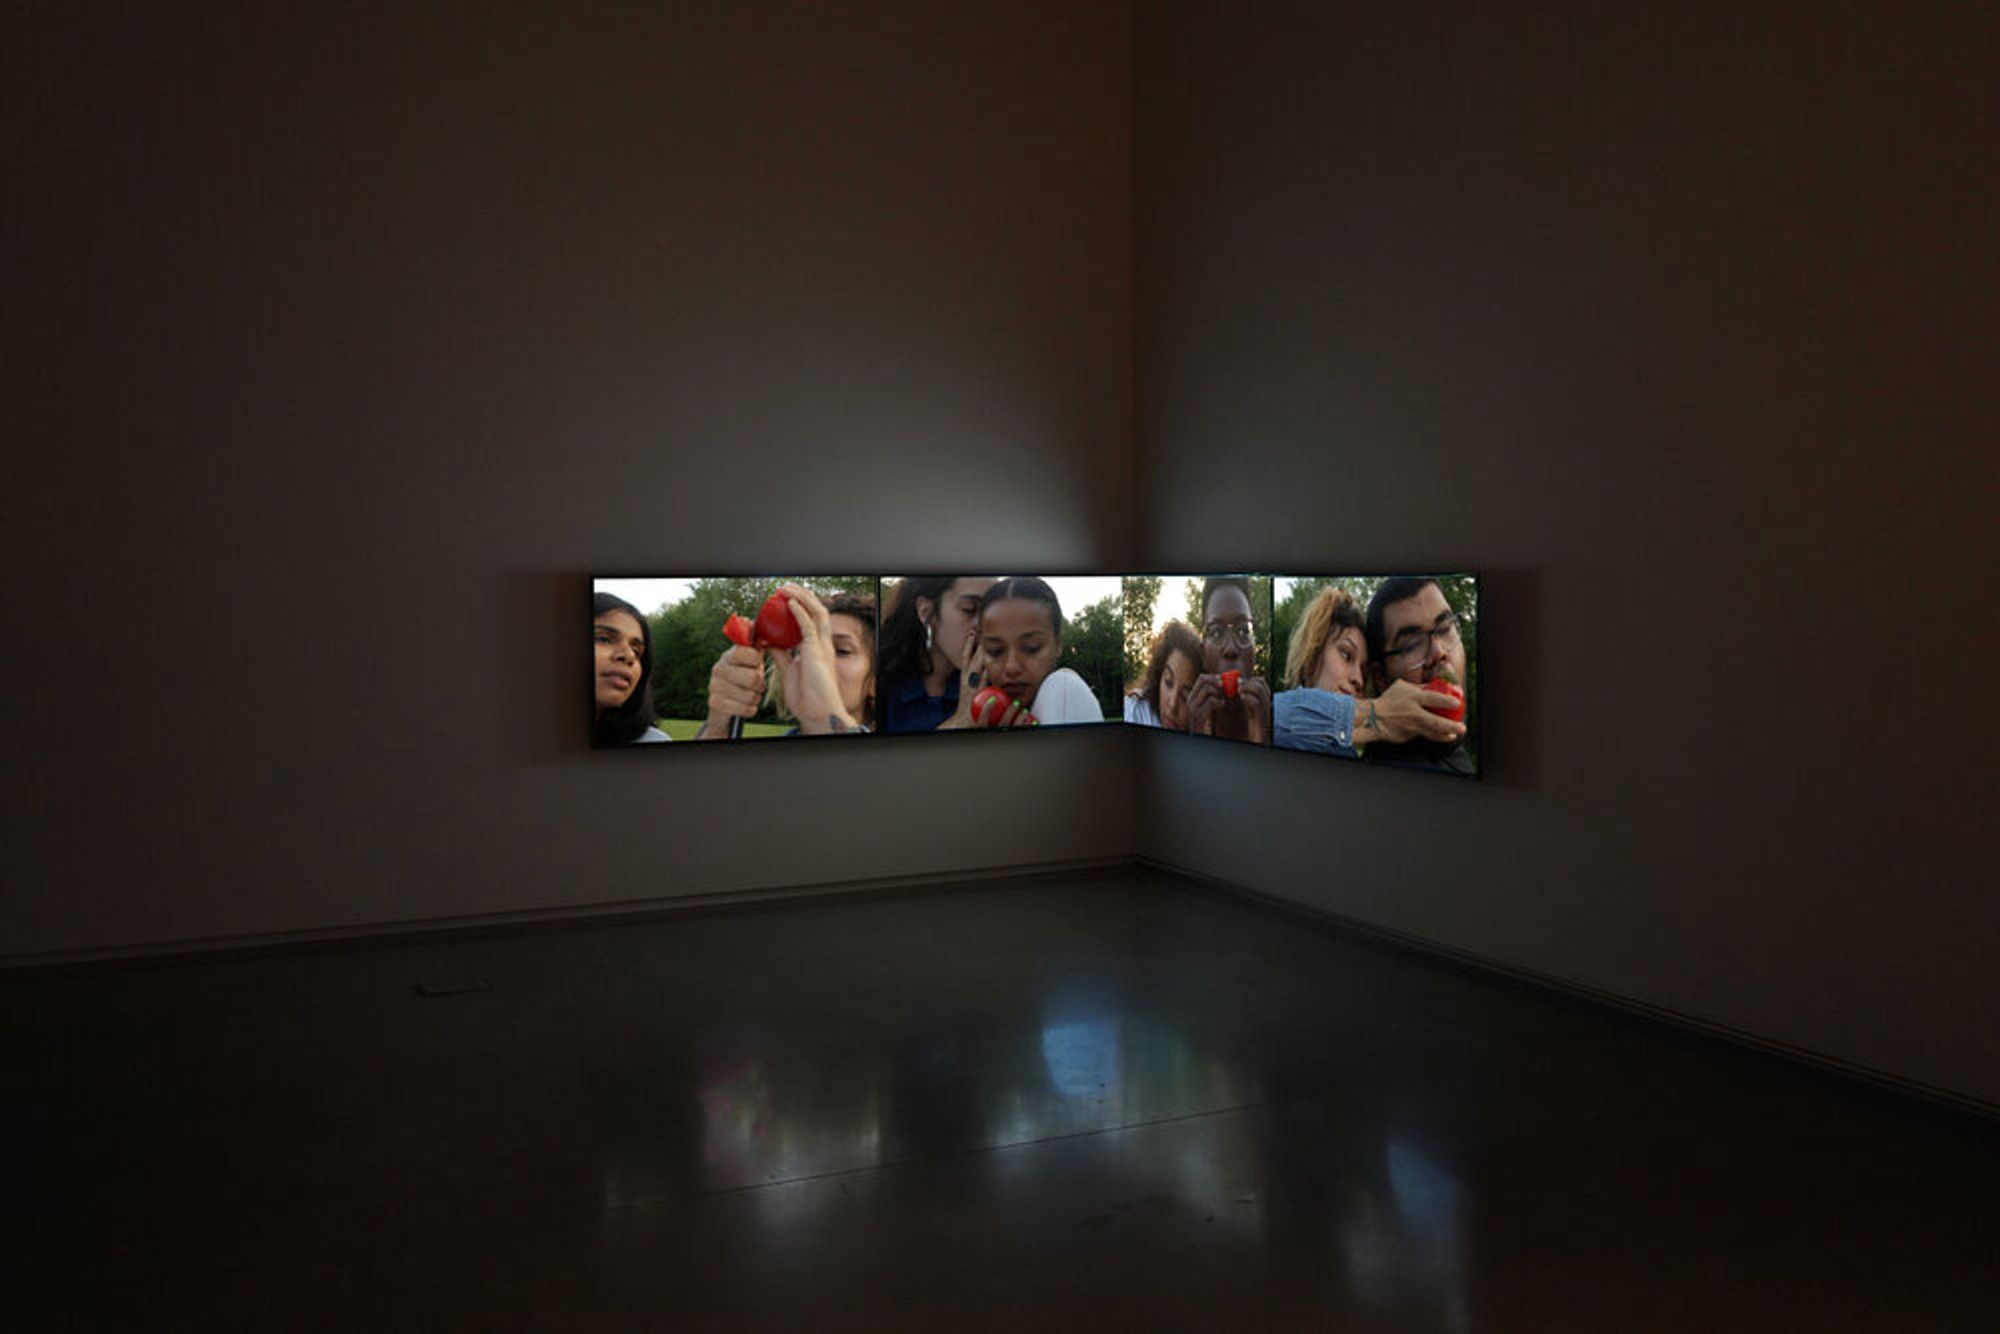 Installation view of Tomatoes (Skowhegan, ME) (2020), from the exhibition from the exhibition Unnamed for Decades, Center for Maine Contemporary Art.